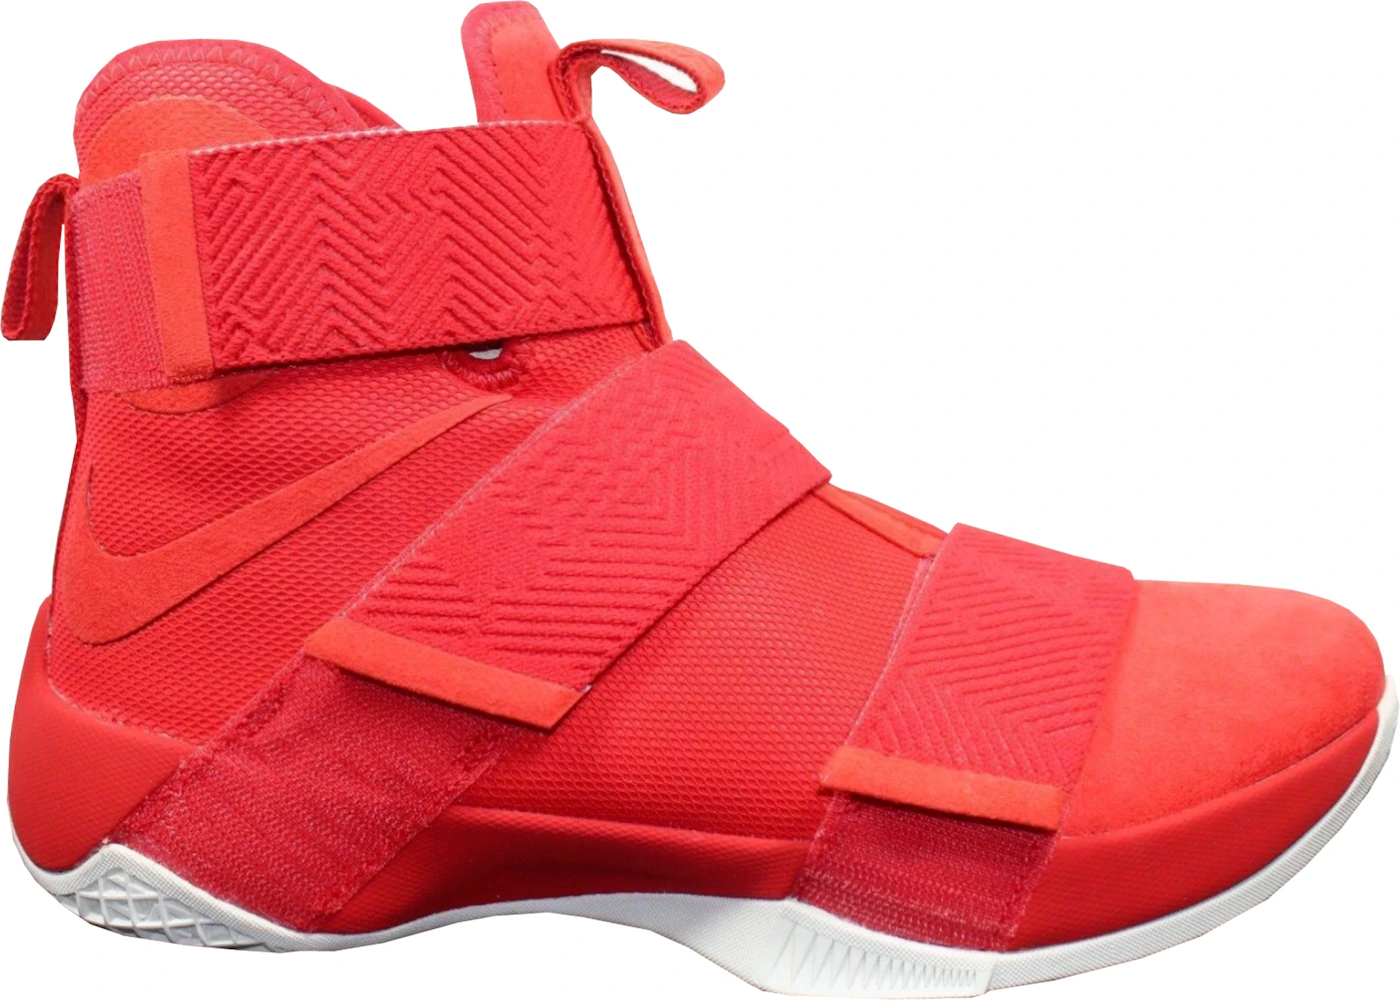 Nike LeBron Zoom Soldier 10 Lux Red メンズ - 911306-600 - JP